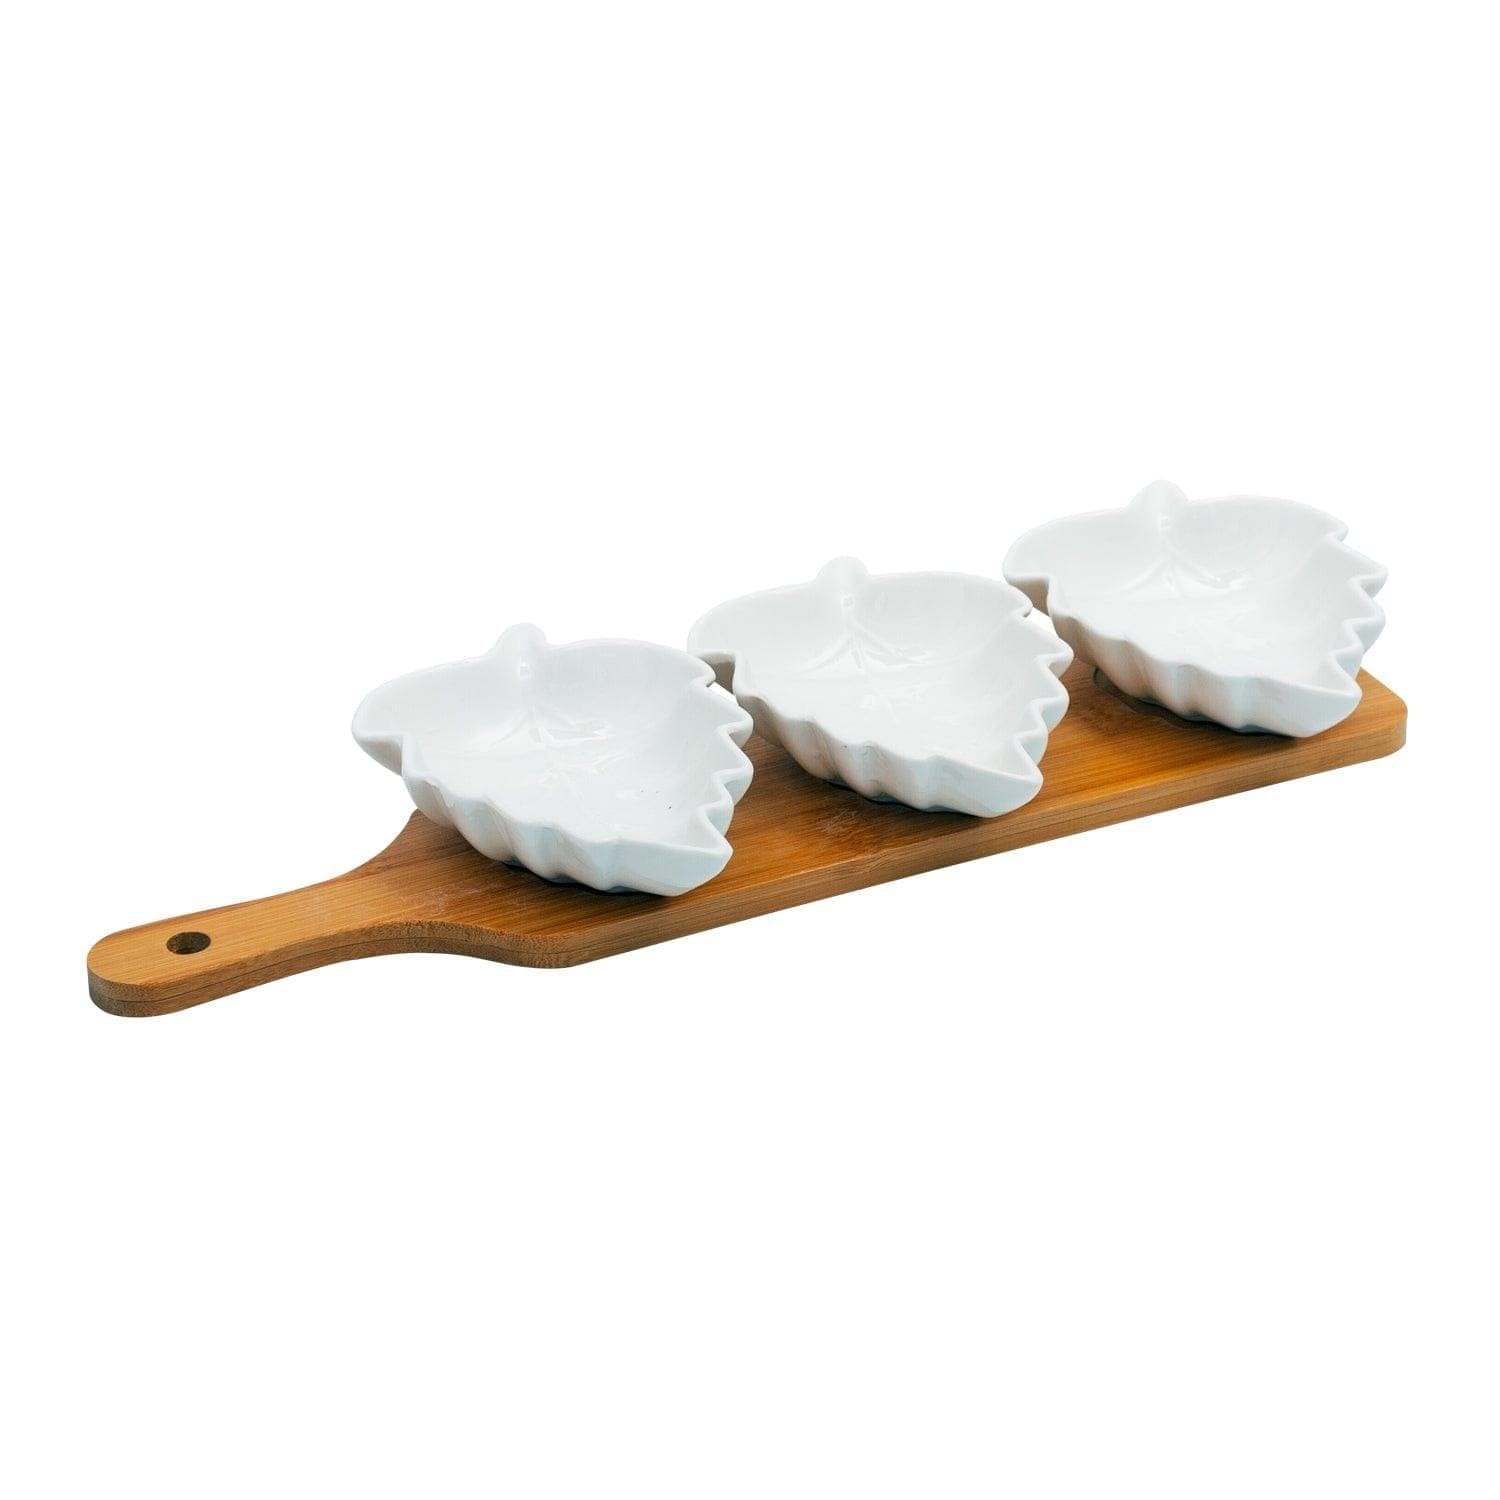 3 Classy Flower Shaped Ceramic Bowls Serving Platter with Wooden Tray Set